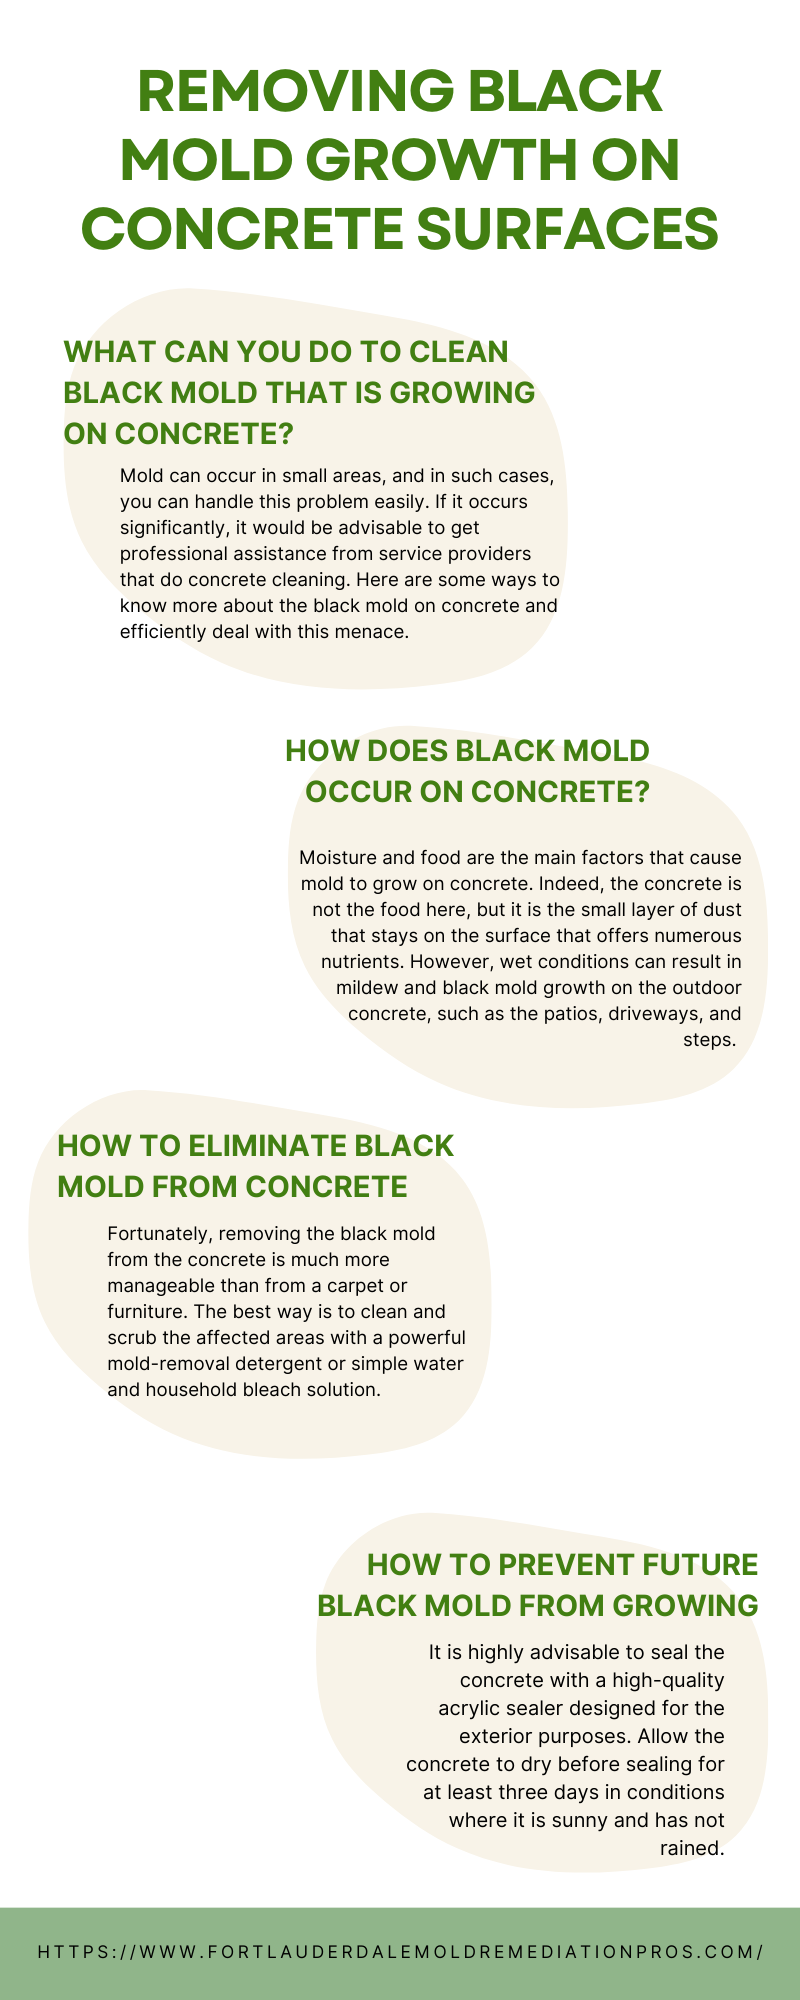 Removing Black Mold Growth on Concrete Surfaces